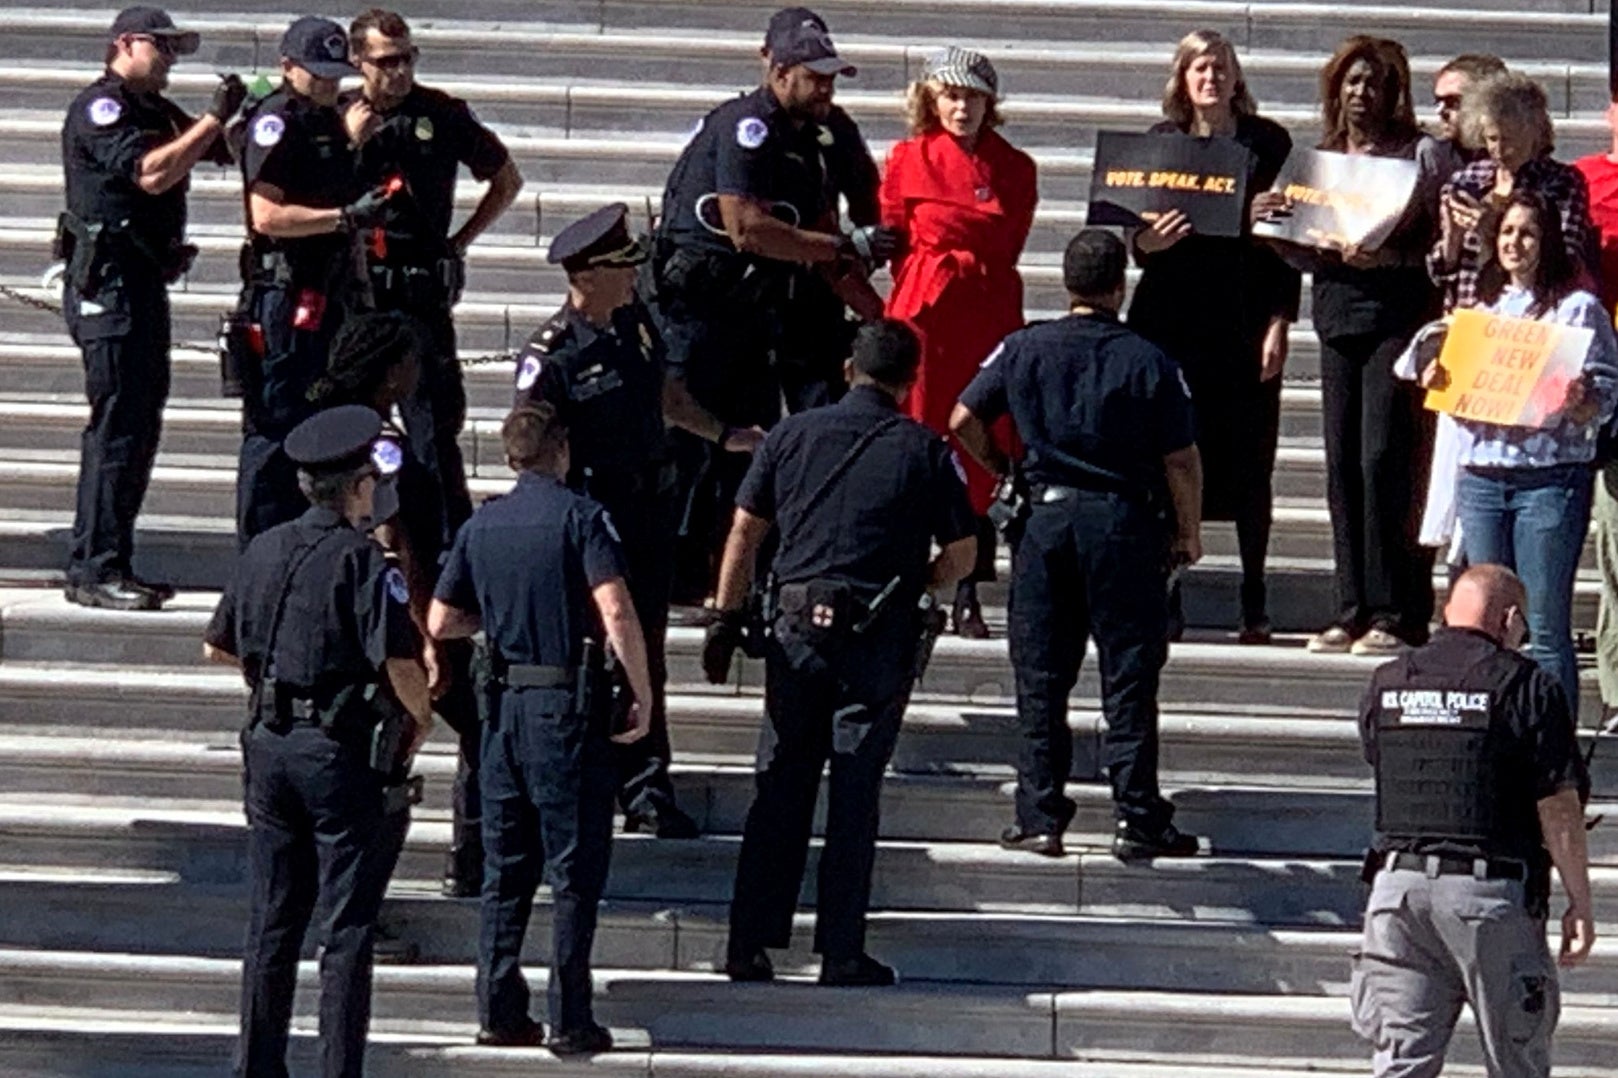 Jane Fonda arrested during climate change protest at Capitol Hill - The Independent